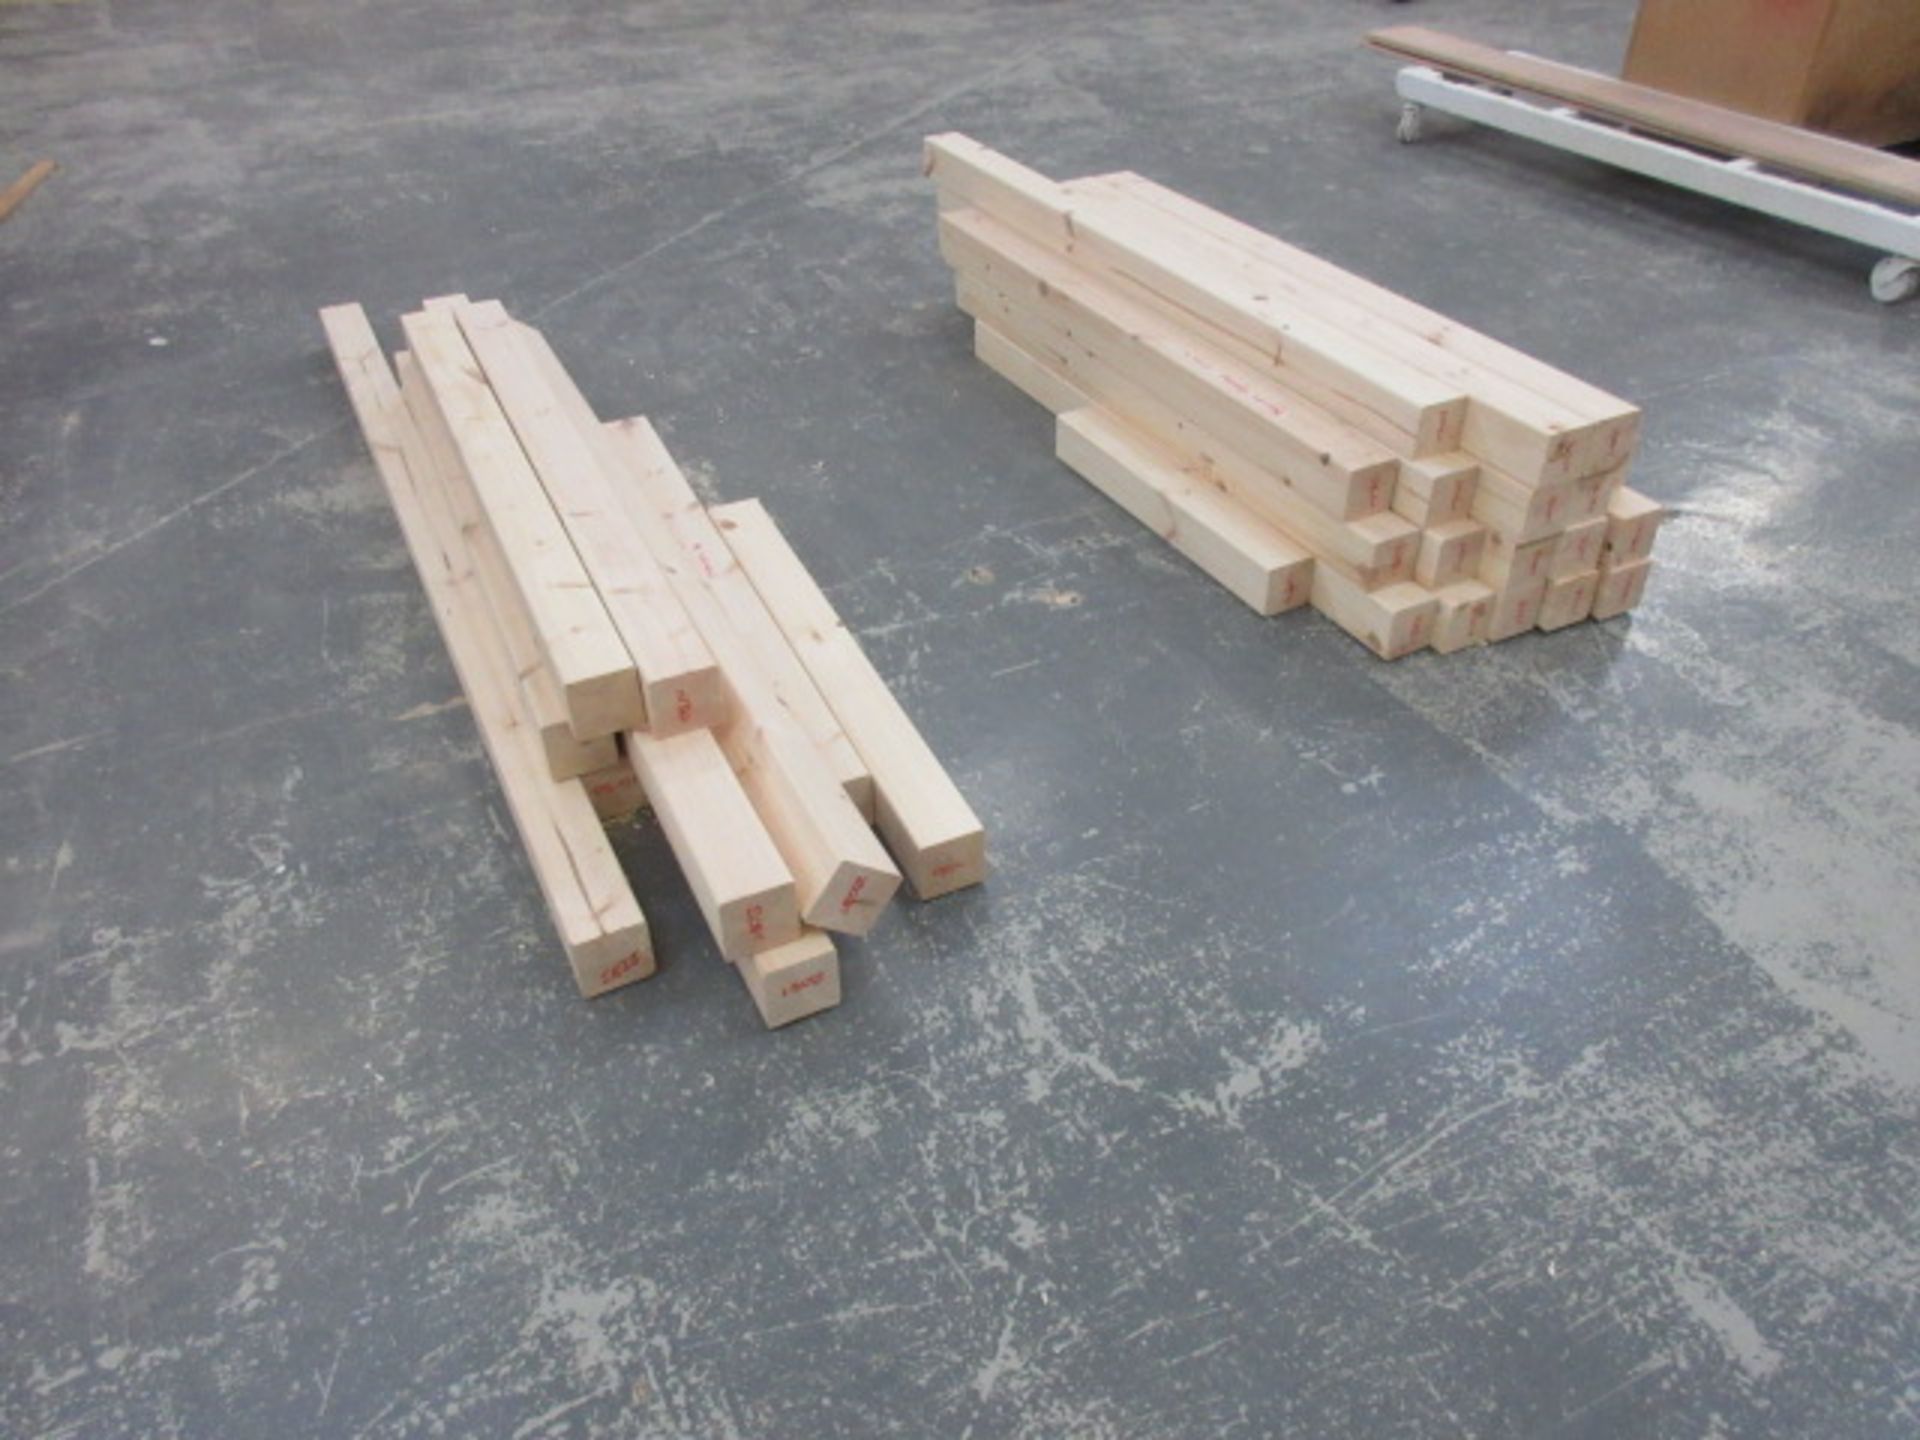 Quantity on newel post work in progress as lotted. - Image 2 of 3